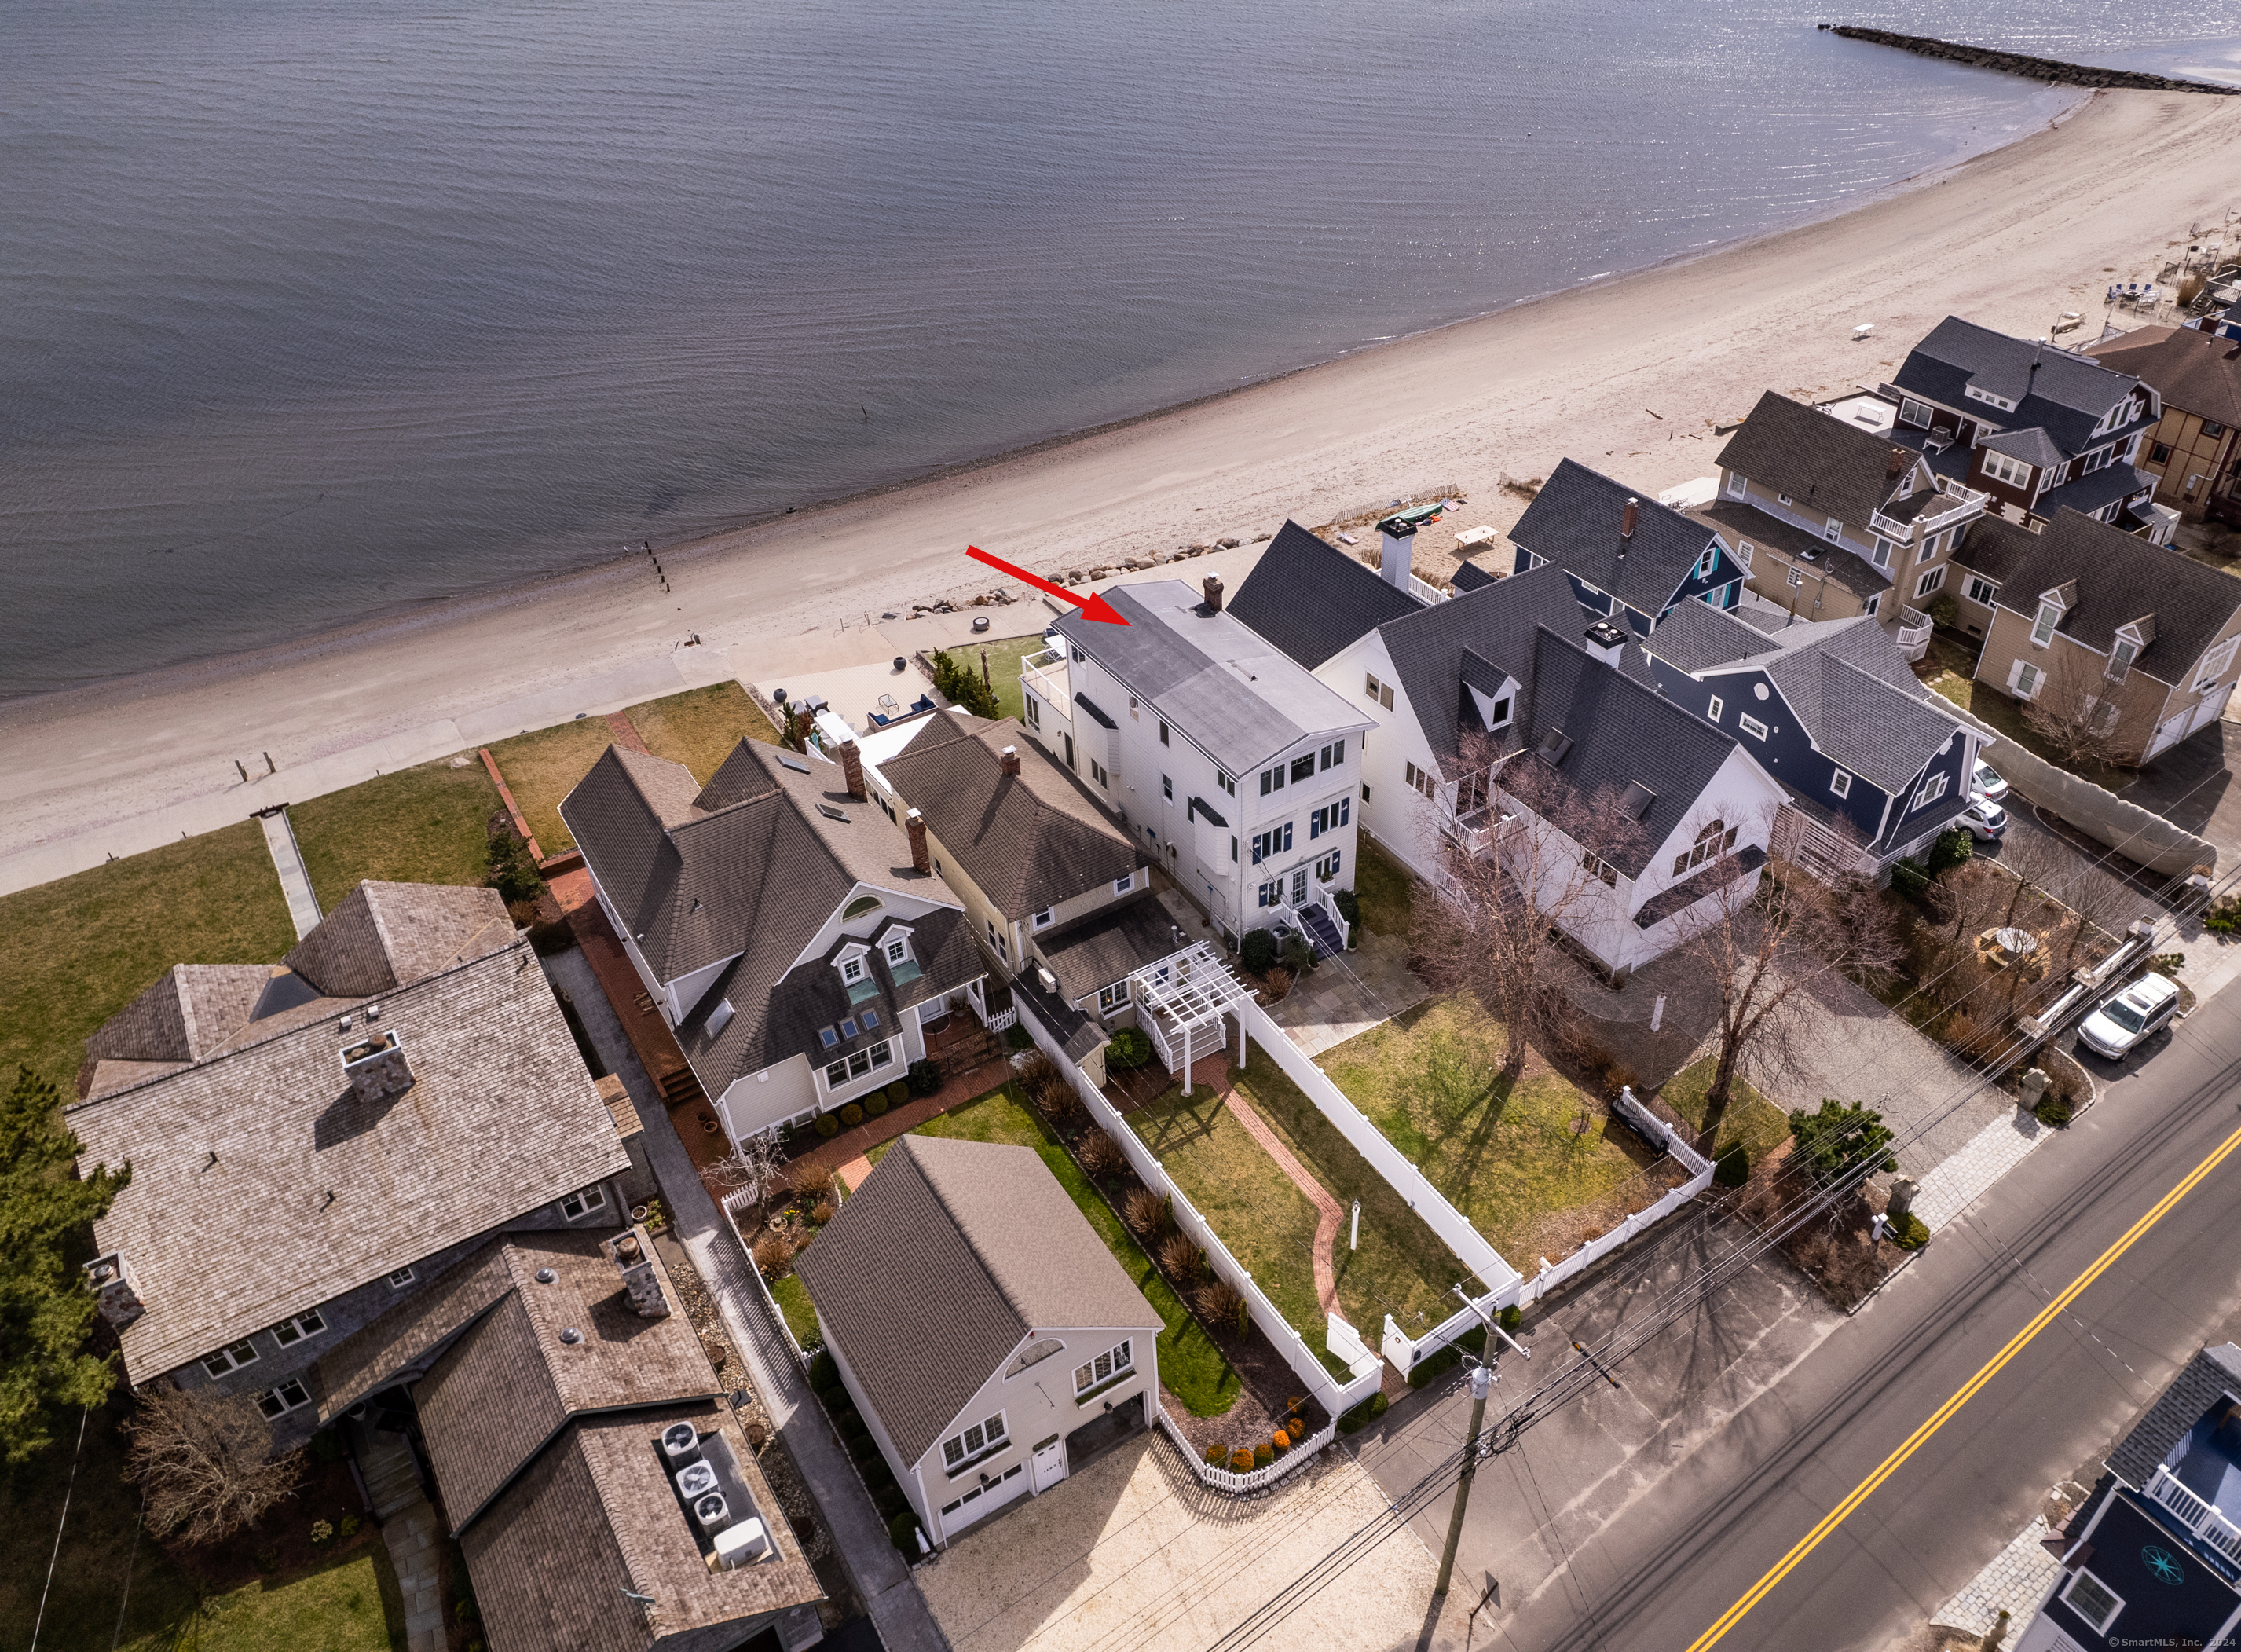 Welcome to this captivating 4-bedroom beachfront Colonial nestled along Fairfield's coveted waterfront. Originally a quaint beach cottage, this home has been thoughtfully expanded and renovated, offering prime access to soft sandy beaches and breathtaking sunsets.  Step outside onto the patio to immerse yourself in panoramic Long Island Sound views, complete with a sea wall. Adorned with a charming white shingled exterior and whimsical blue shutters, this residence is surrounded by an established perennial landscape. Inside, the kitchen boasts a tiled floor, butcher block station, and breakfast bar opening into a spacious dining area. Relax in the bright living room with a cozy gas fireplace or enjoy beachfront views from the sun room.  Upstairs, the master bedroom features a huge private balcony with lighting, overlooking the tranquil beach. With 4 generously-sized bedrooms spread across the second and third floors, this home offers ample space for families and versatile home office setups. For added convenience, a second-floor laundry room streamlines chores. Outdoor living is enhanced with an additional outdoor shower. Wainscot ceilings, accent walls, and bamboo floors throughout add coastal charm. Parking is accommodated for three cars in the paved driveway, with additional property on the creekside. Inquire about possible ideas for a carport/garage. Don't miss the chance to make this waterfront sanctuary your own. Experience coastal living at its best .